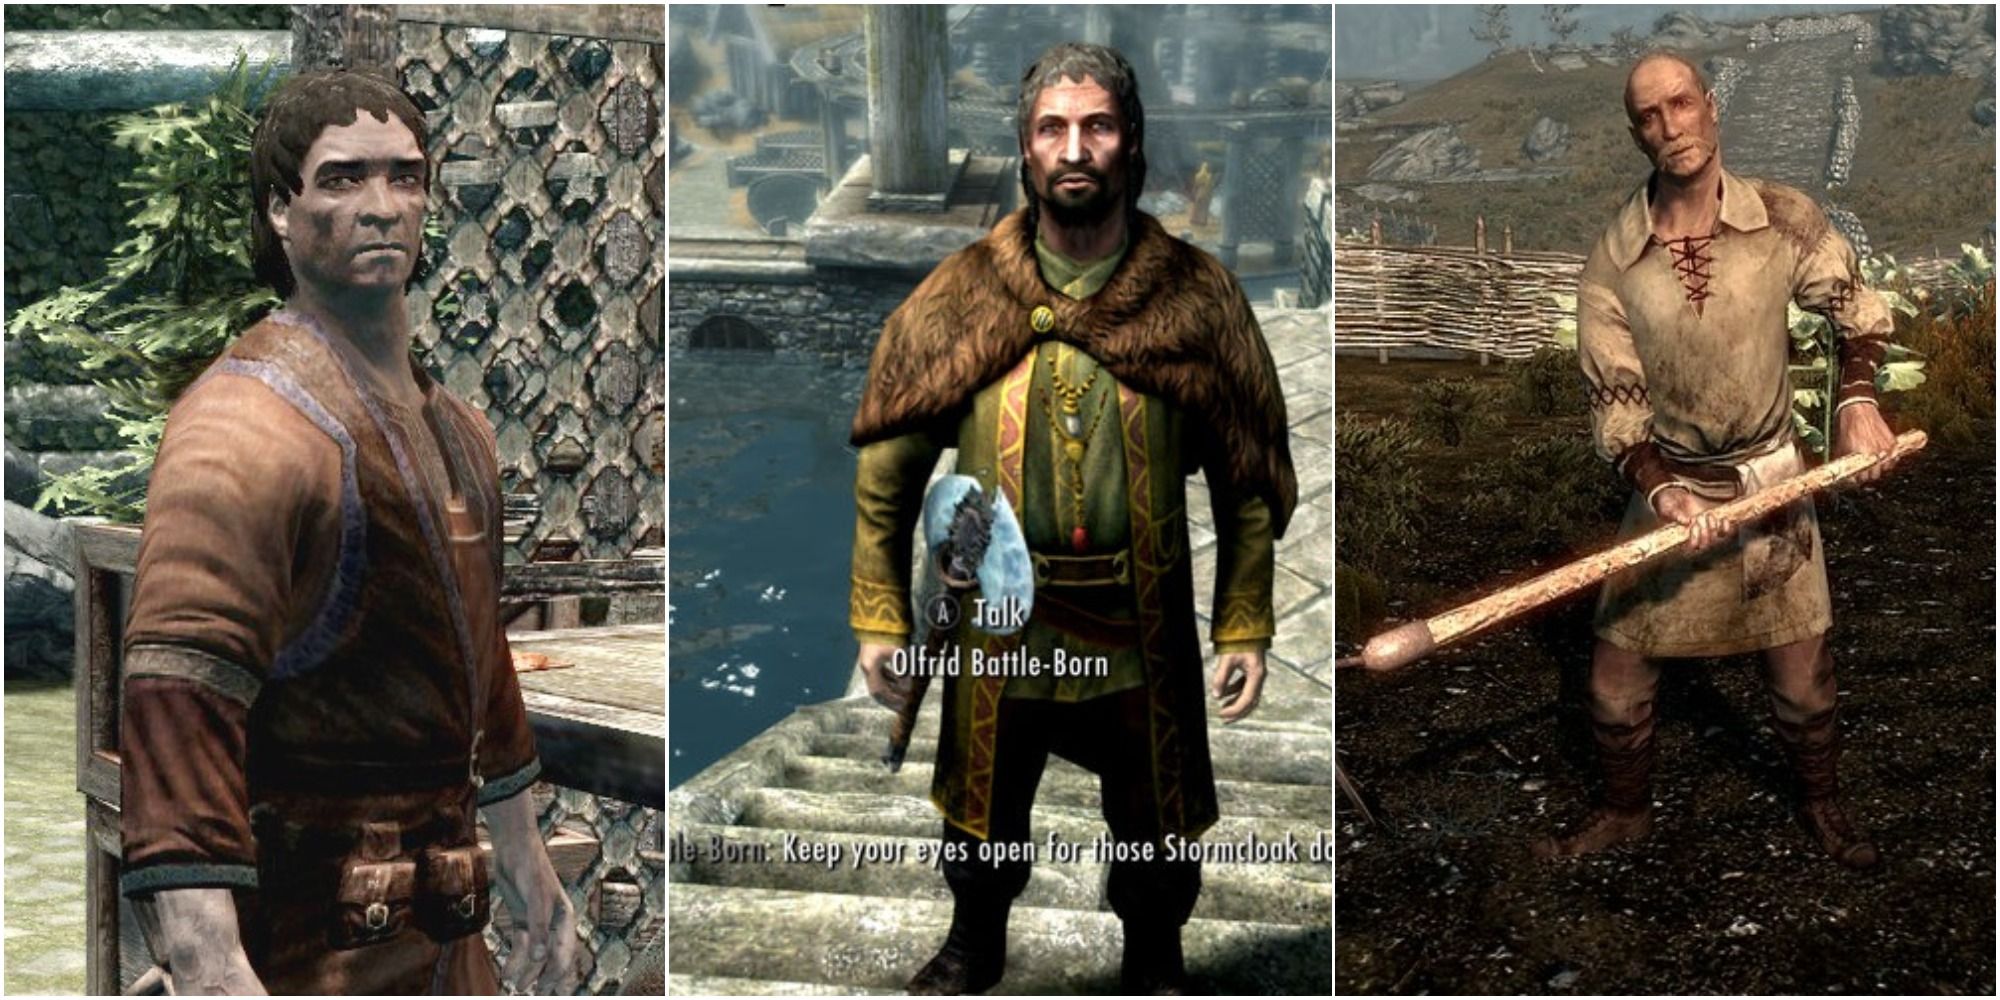 addvar, olfrid and lemkil from skyrim are all secretly evil characters